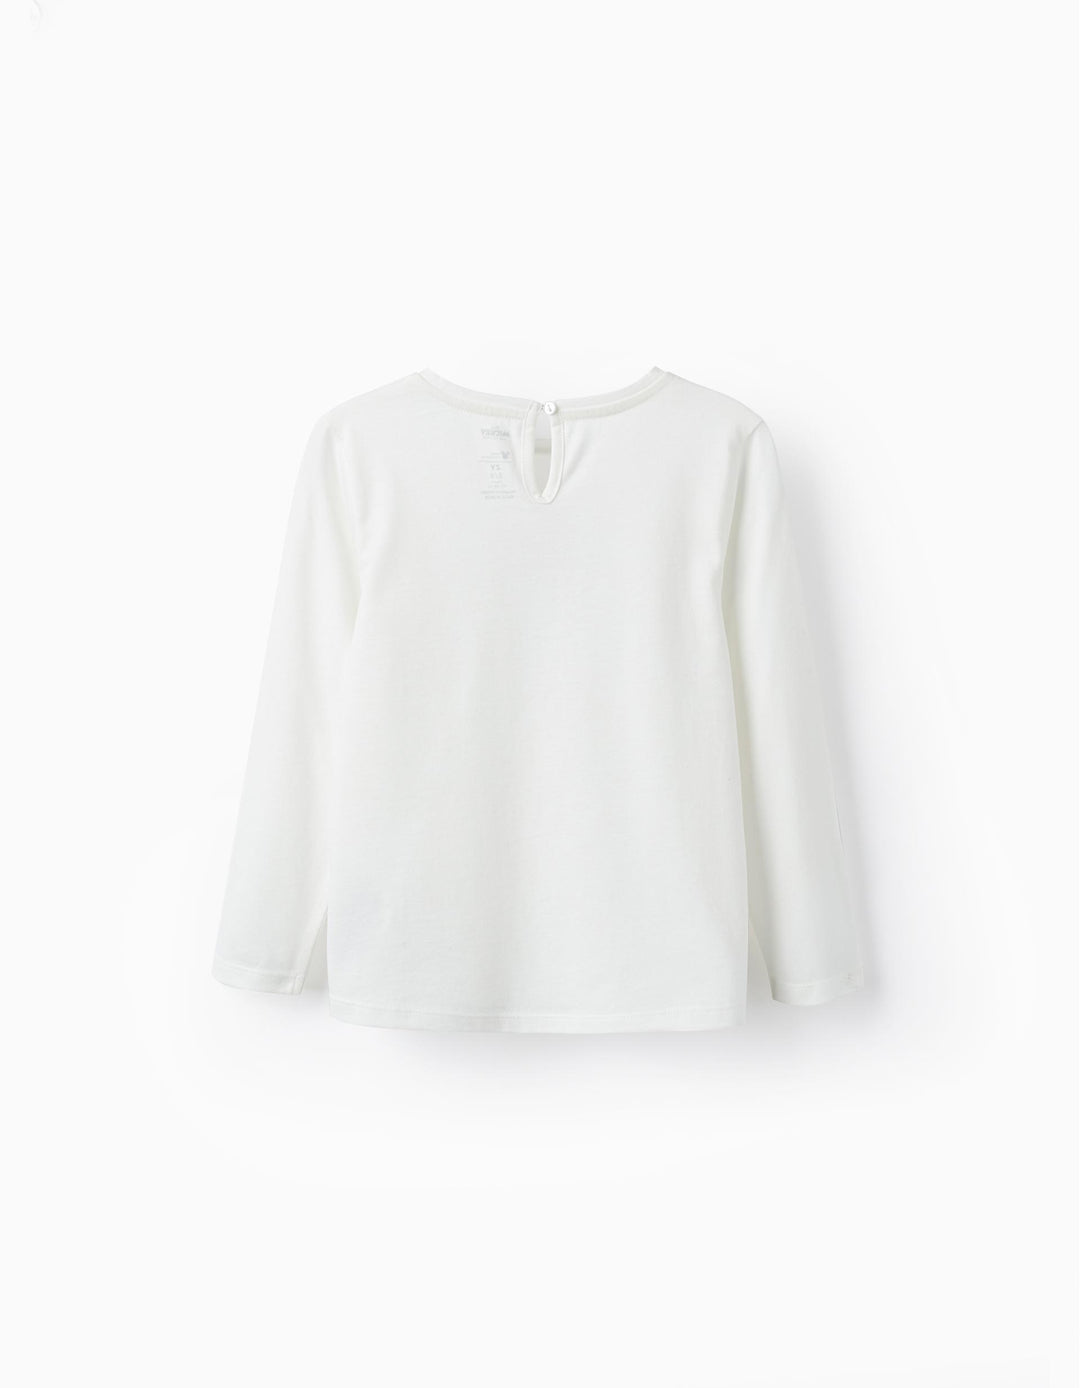 Long-Sleeved T-Shirt for Girls 'Minnie', White